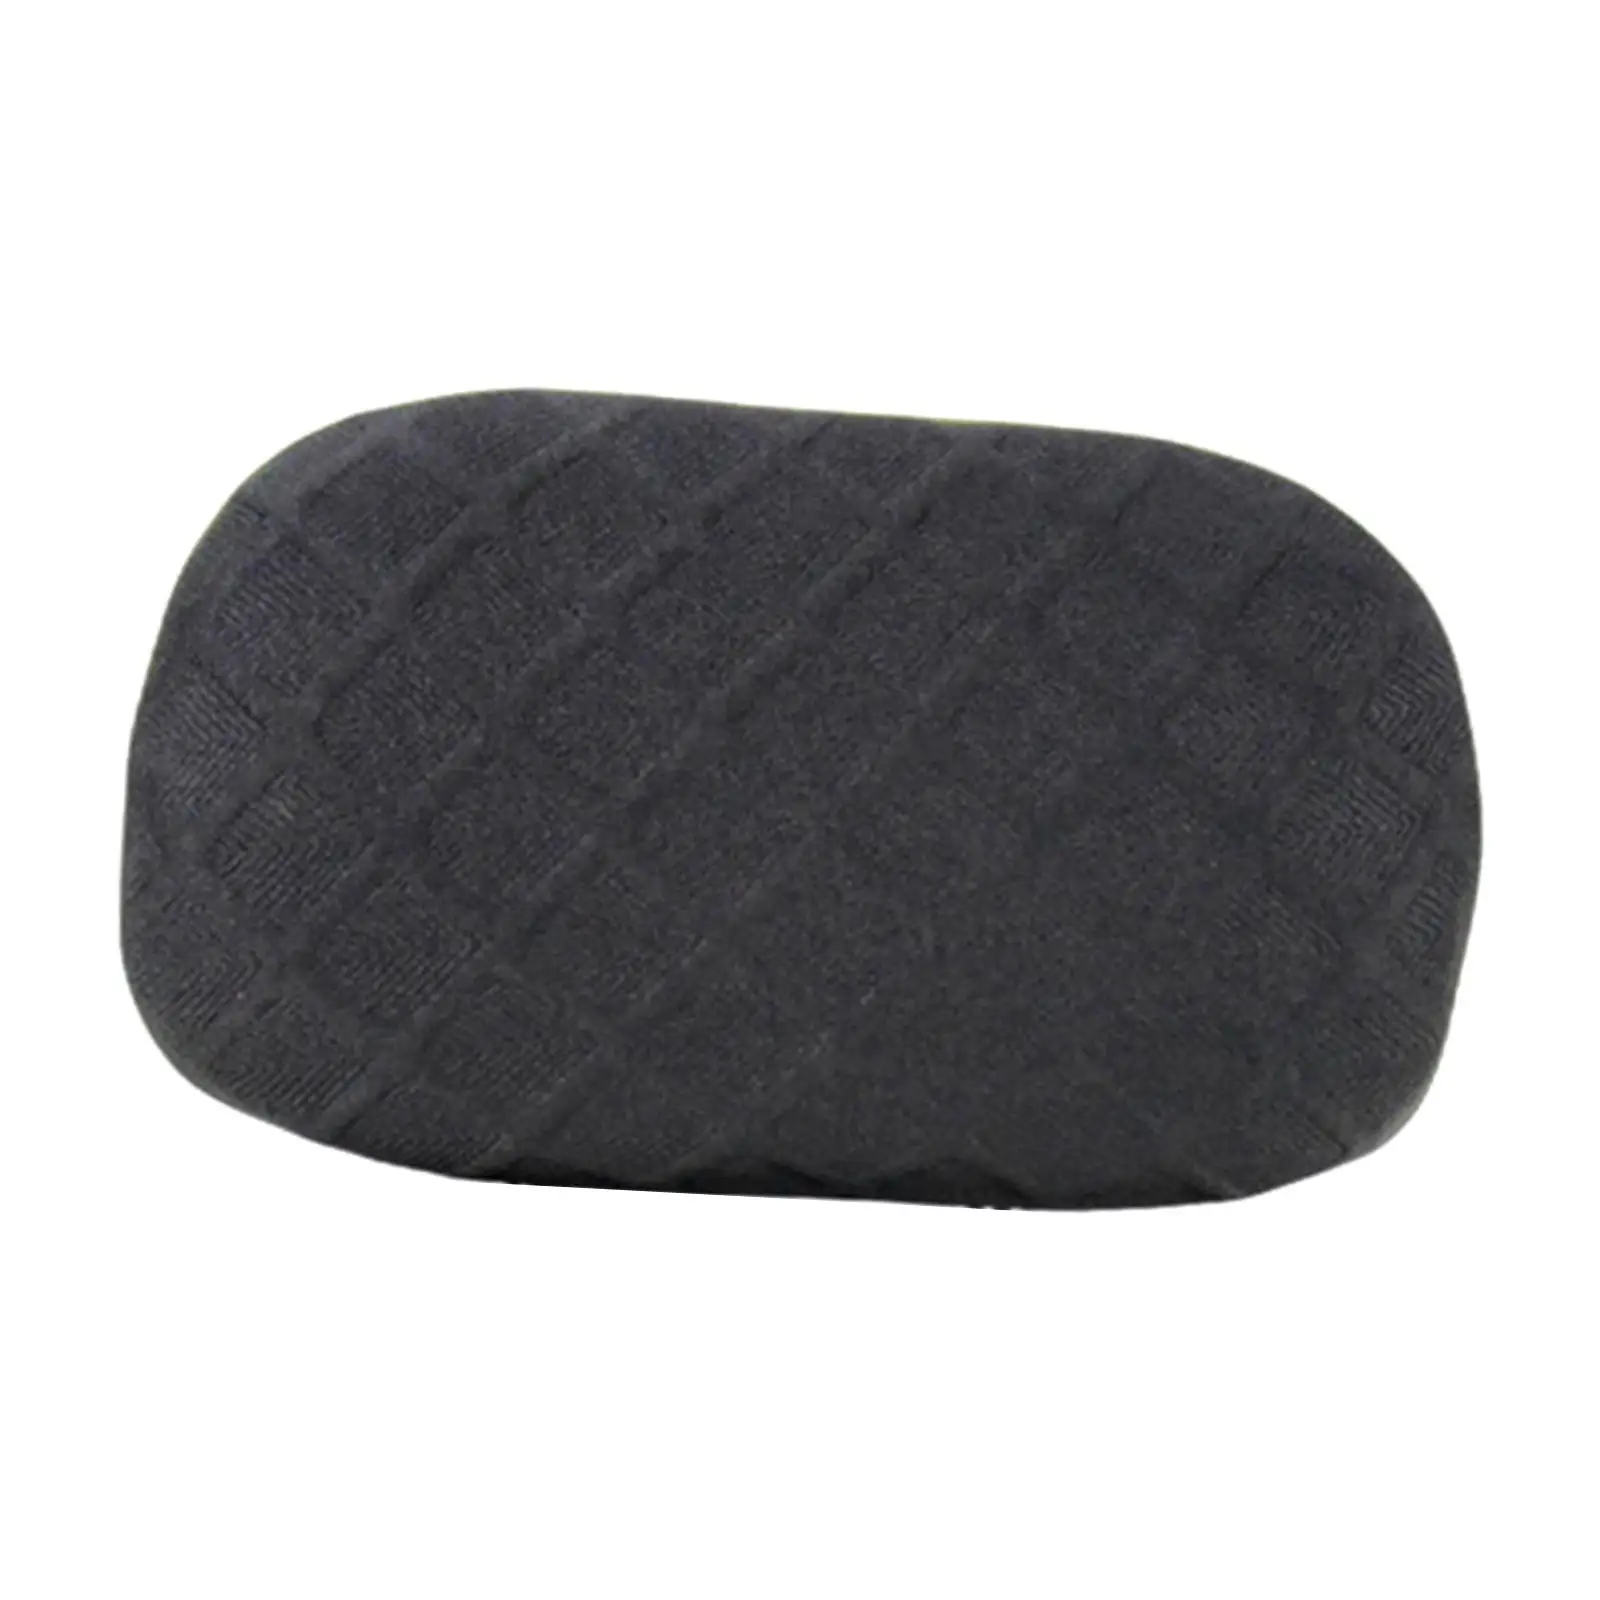 polyester office chair head pillow cover, gaming chair headrest cover, gaming